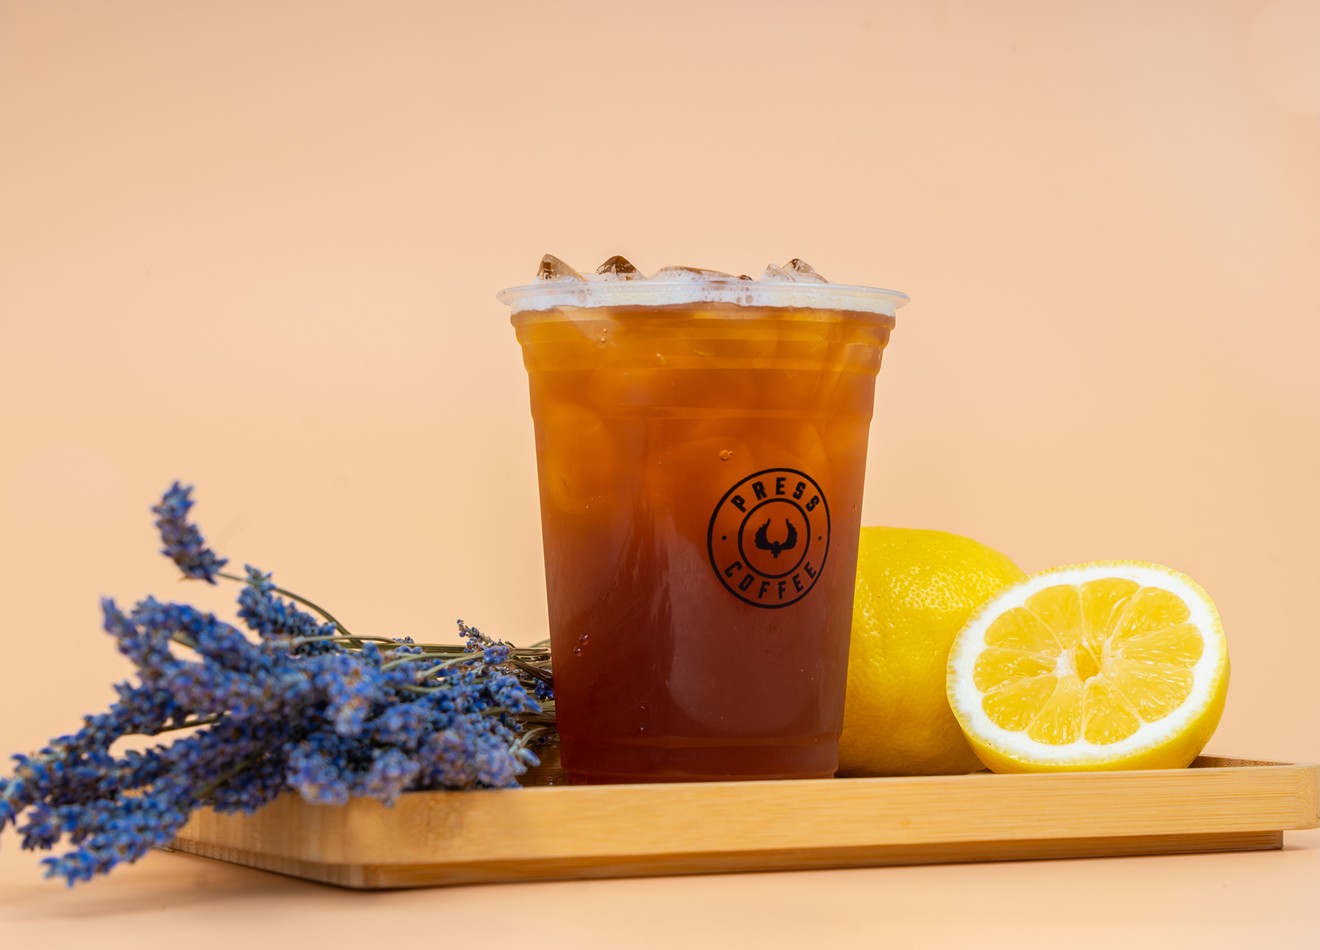 Press Coffee's lavender lemon cold brew is its seasonal shaker that unites cold brew, lemonade and lavender syrup.